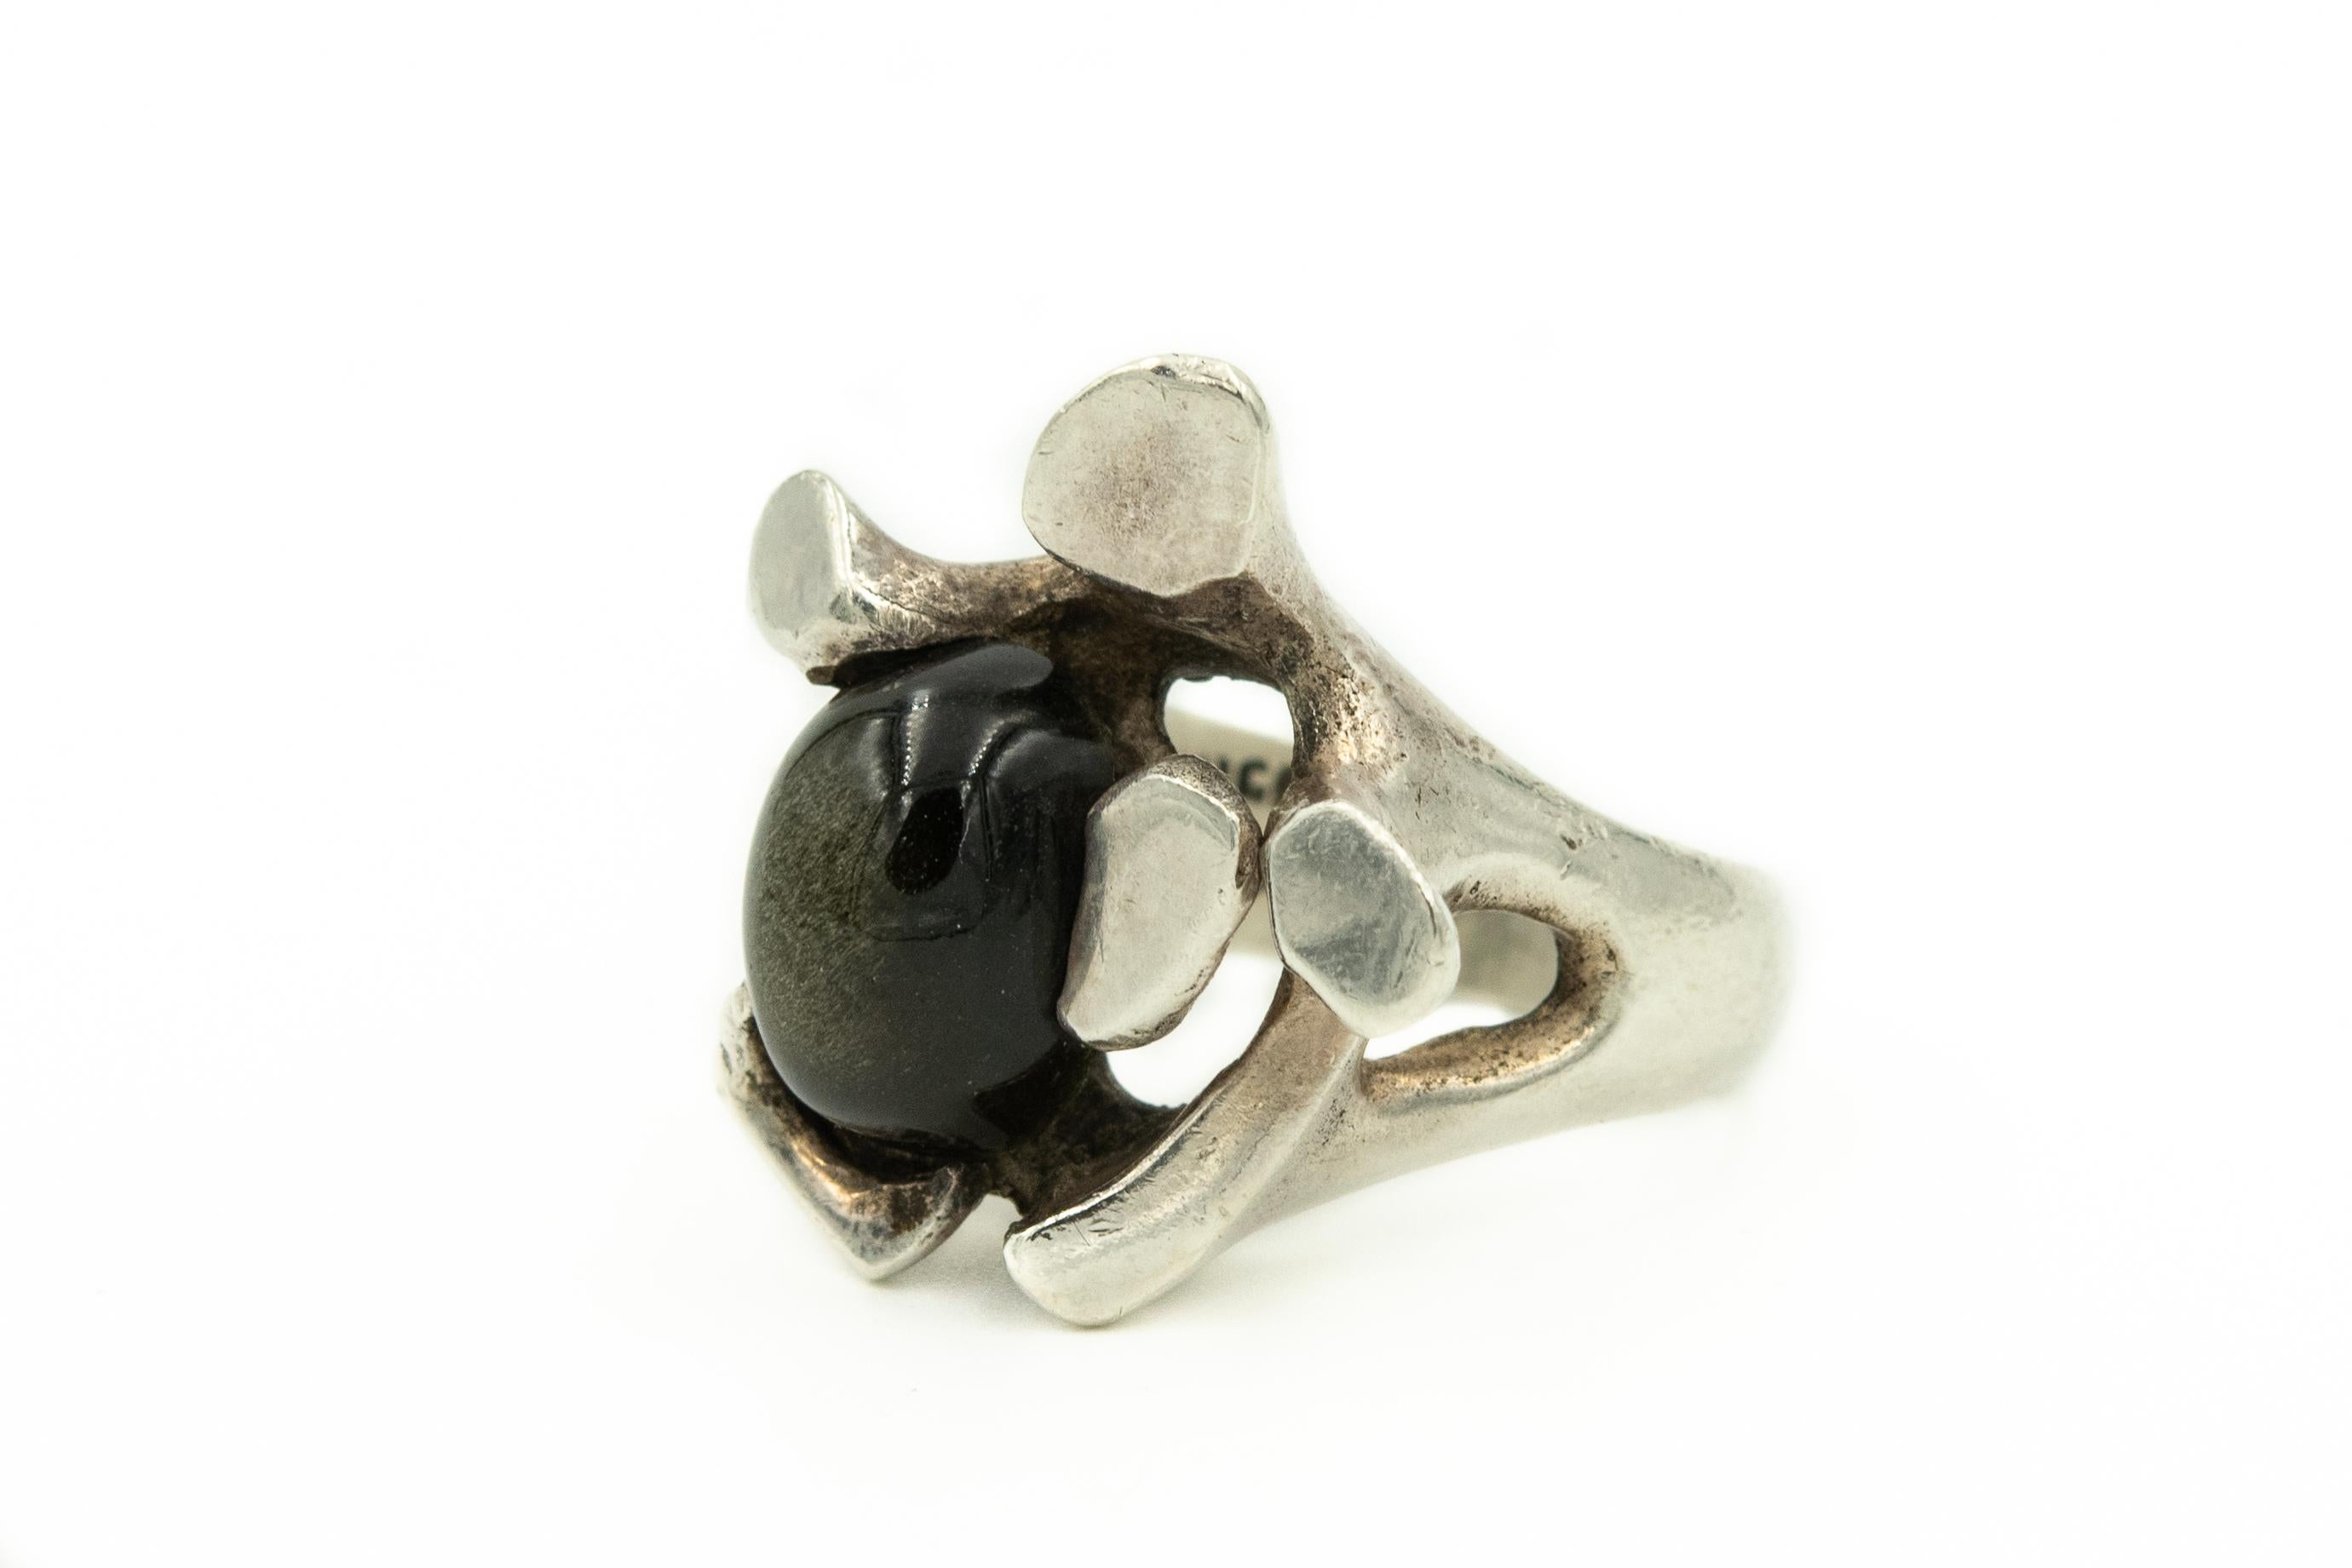 Modernist Mexican sterling silver ring by Mateo featuring a cabochon black sapphire mounted in a silver design.  The large chunky stamen-like shapes surround the gem, with several acting as prongs. Three additional smaller prongs hold the 9.5mm x